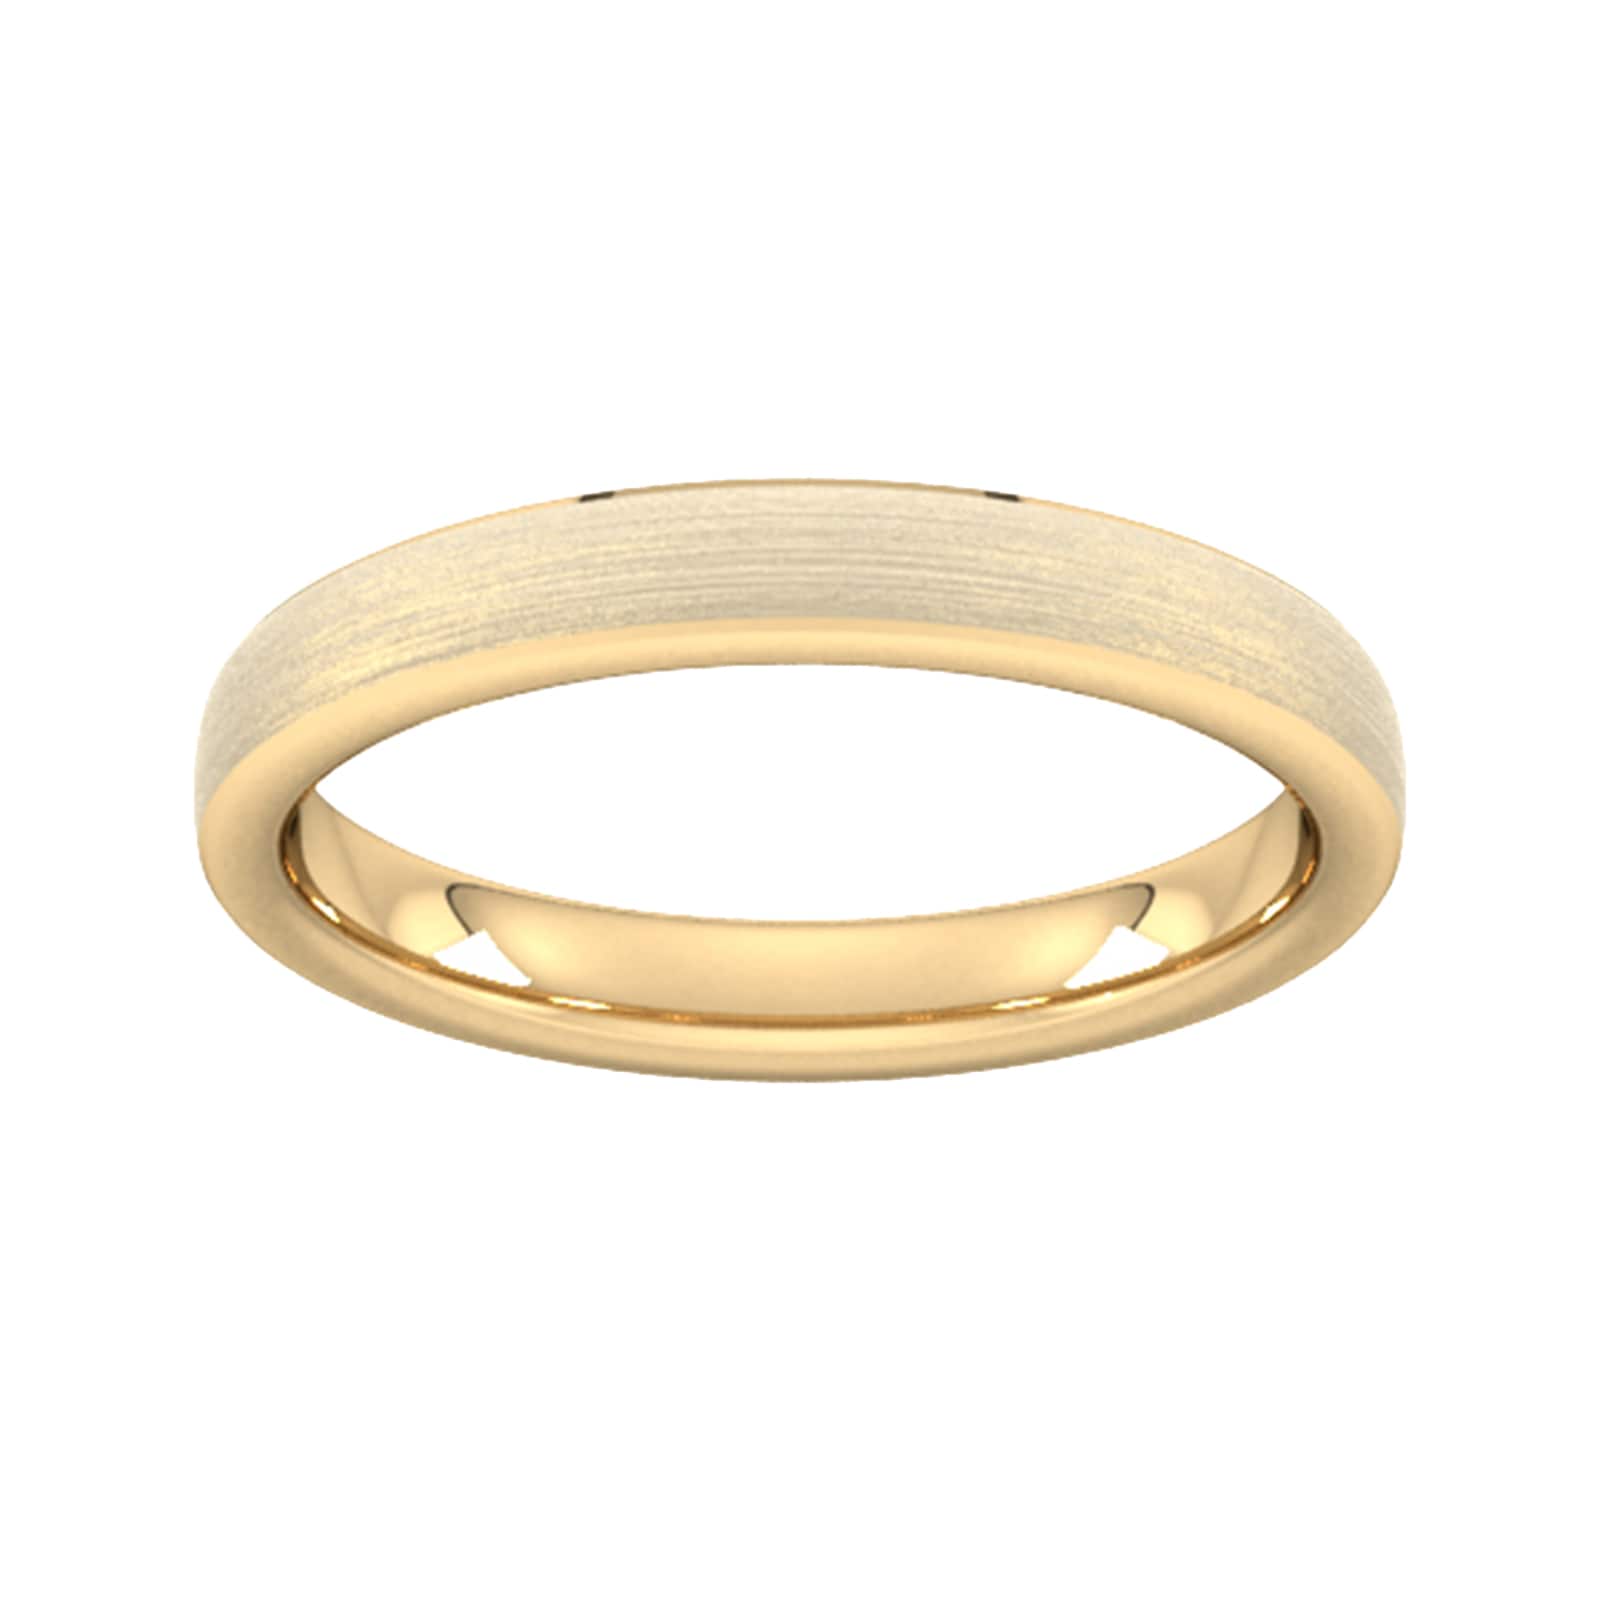 3mm D Shape Standard Polished Chamfered Edges With Matt Centre Wedding Ring In 18 Carat Yellow Gold - Ring Size W